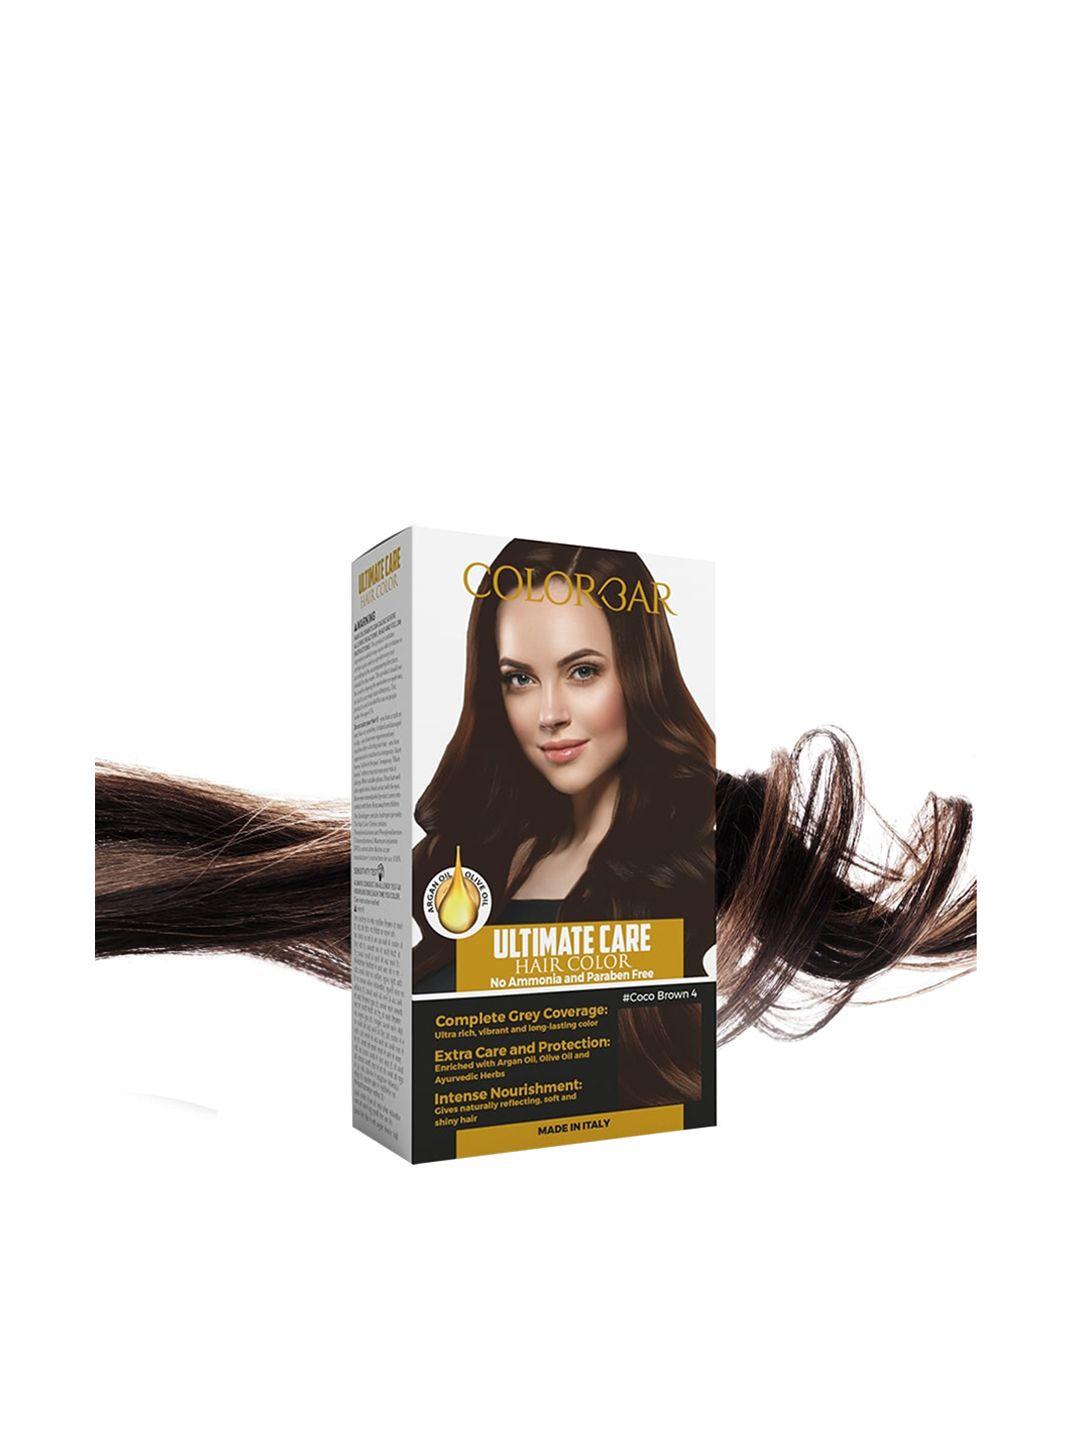 colorbar-ultimate-care-hair-color---coco-brown-145-ml